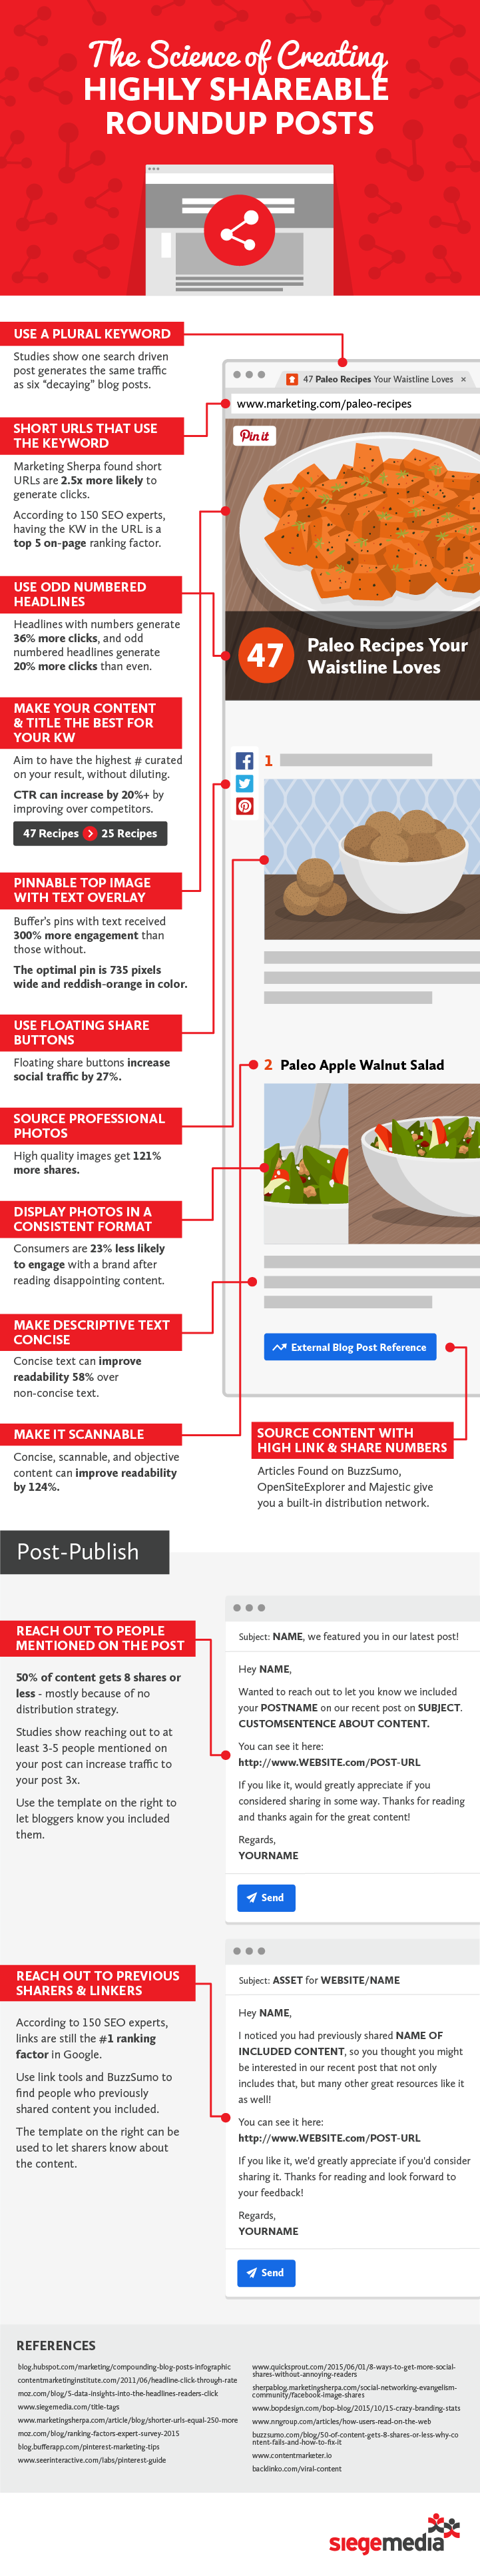 The Anatomy of a Highly Shareable List Post [Infographic]